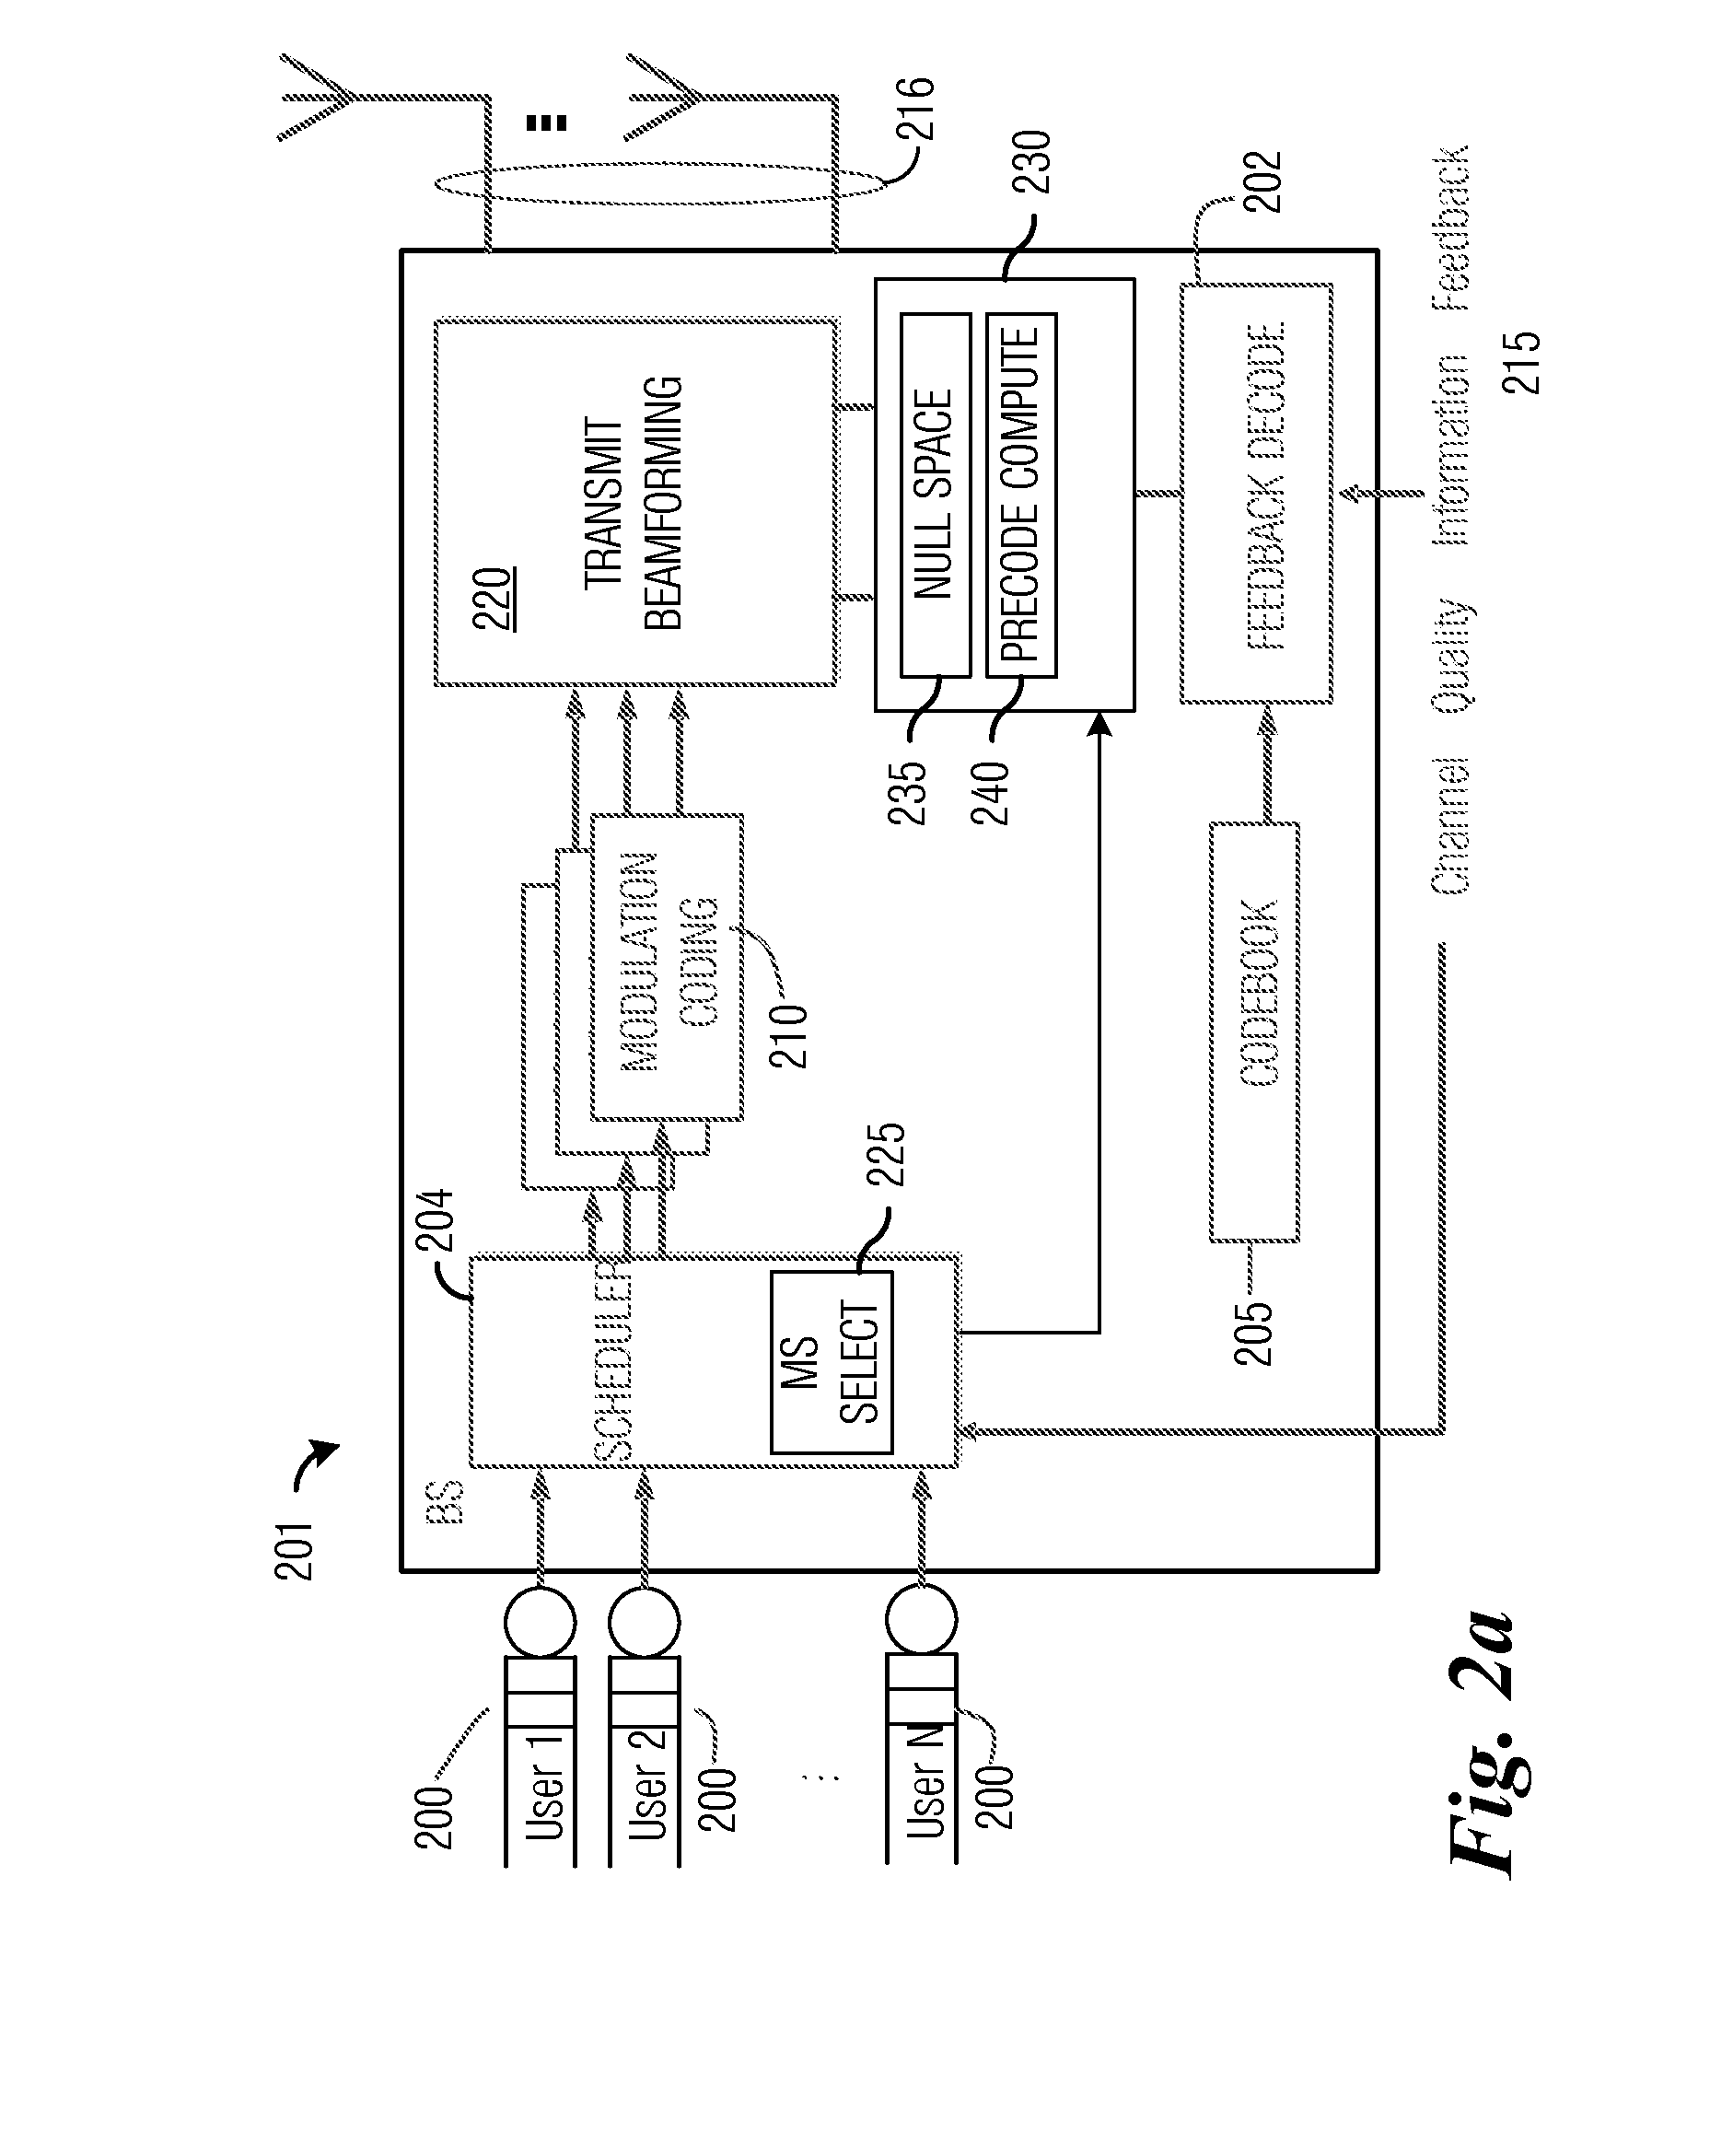 System and Method for Reduced Feedback in Multiuser Multiple Input, Multiple Output Wireless Communications